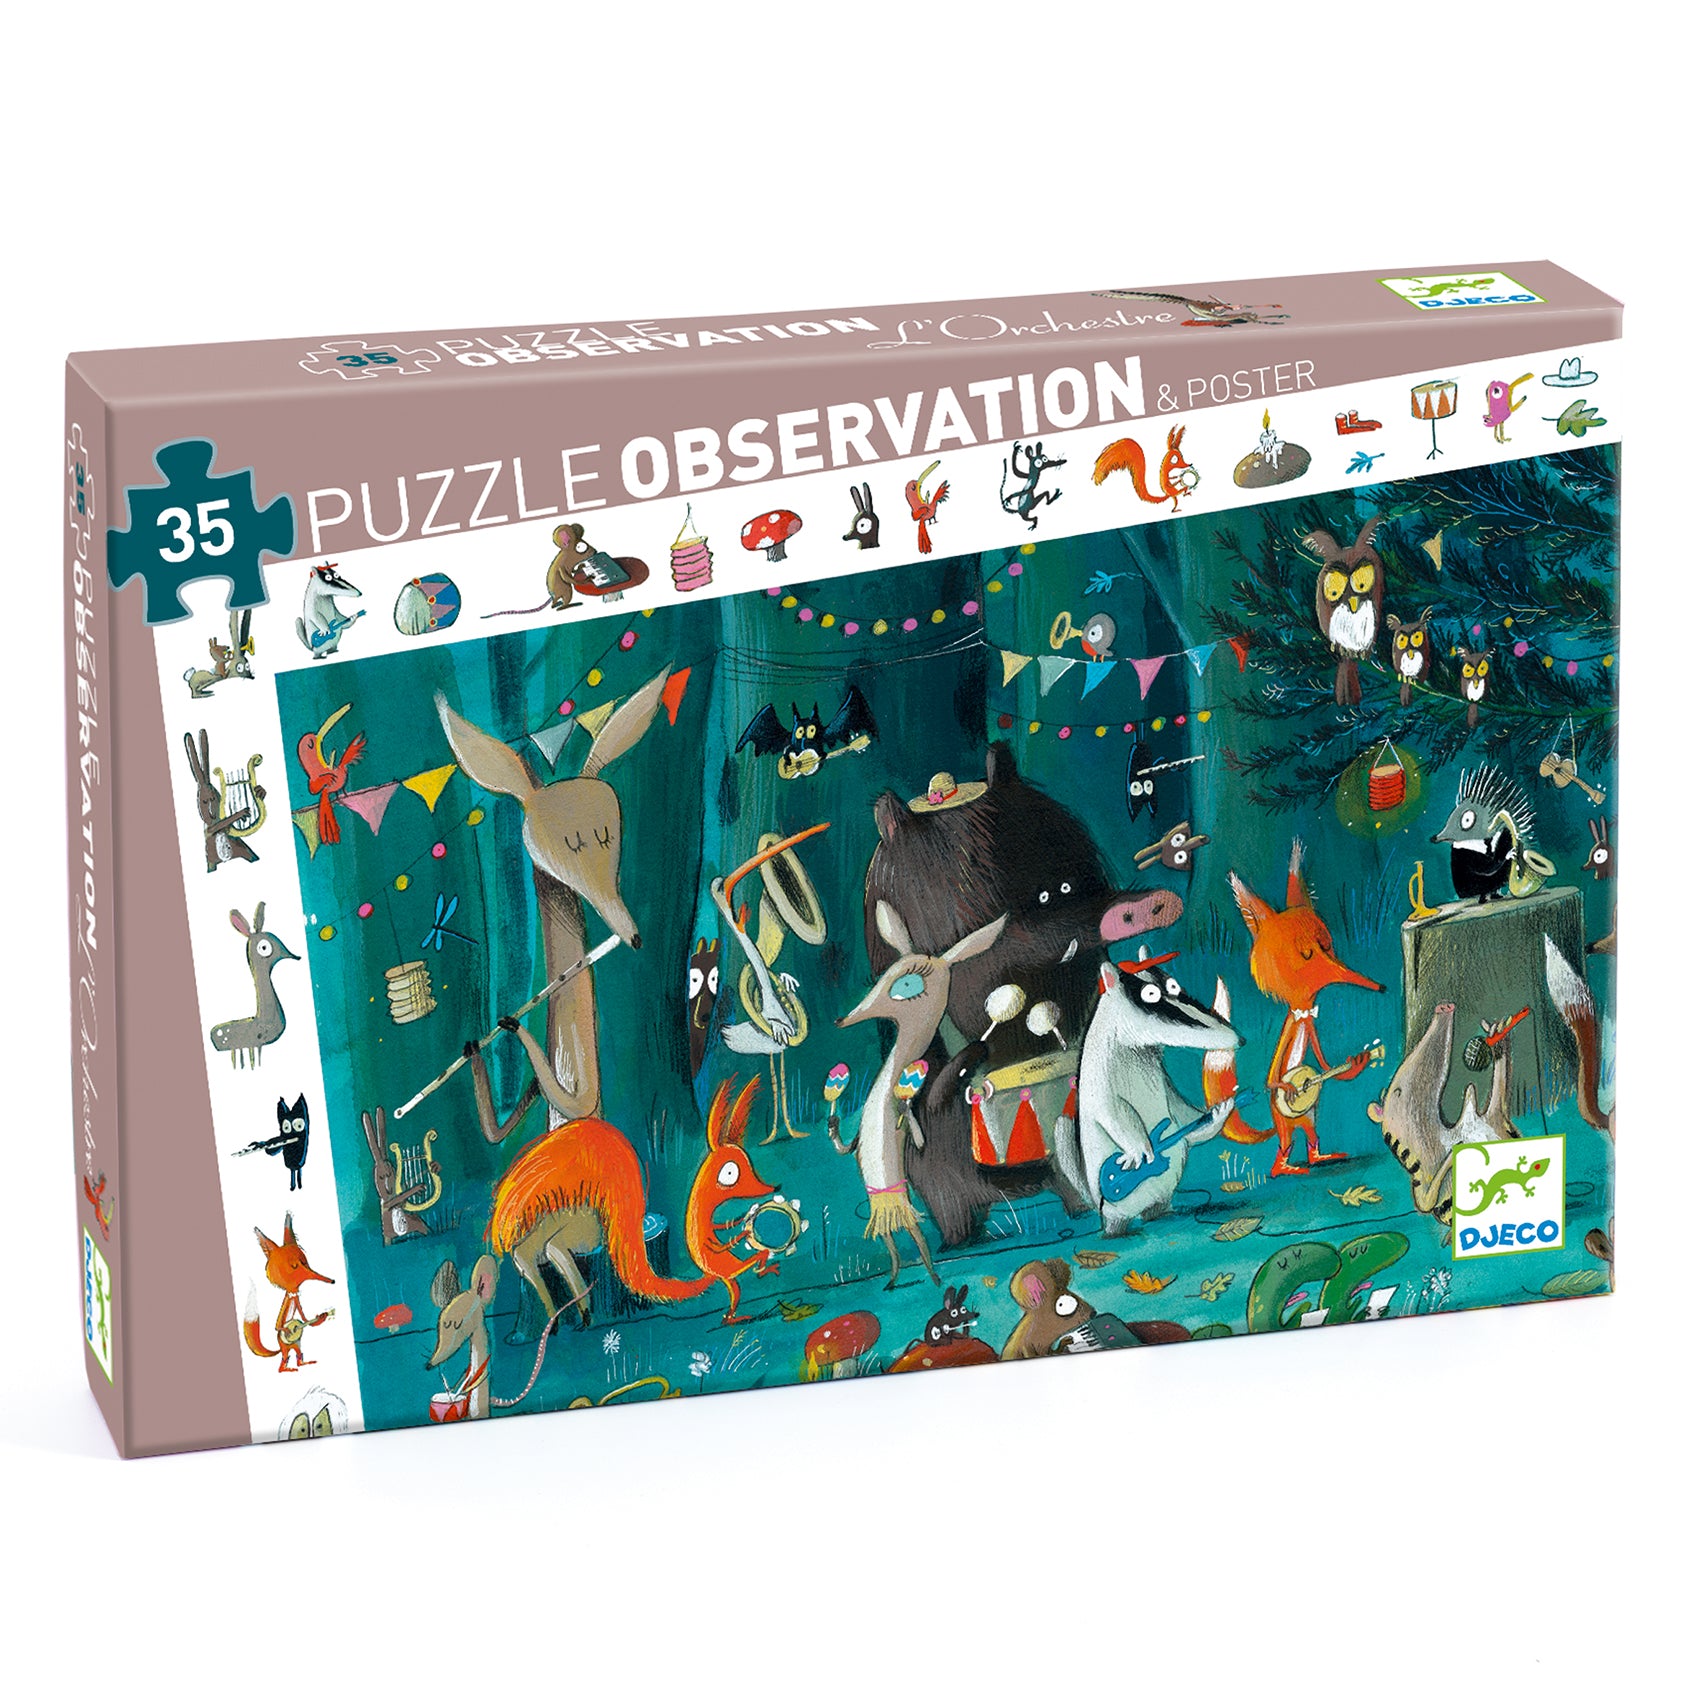 Djeco 35 Piece The Orchestra Observation Puzzle